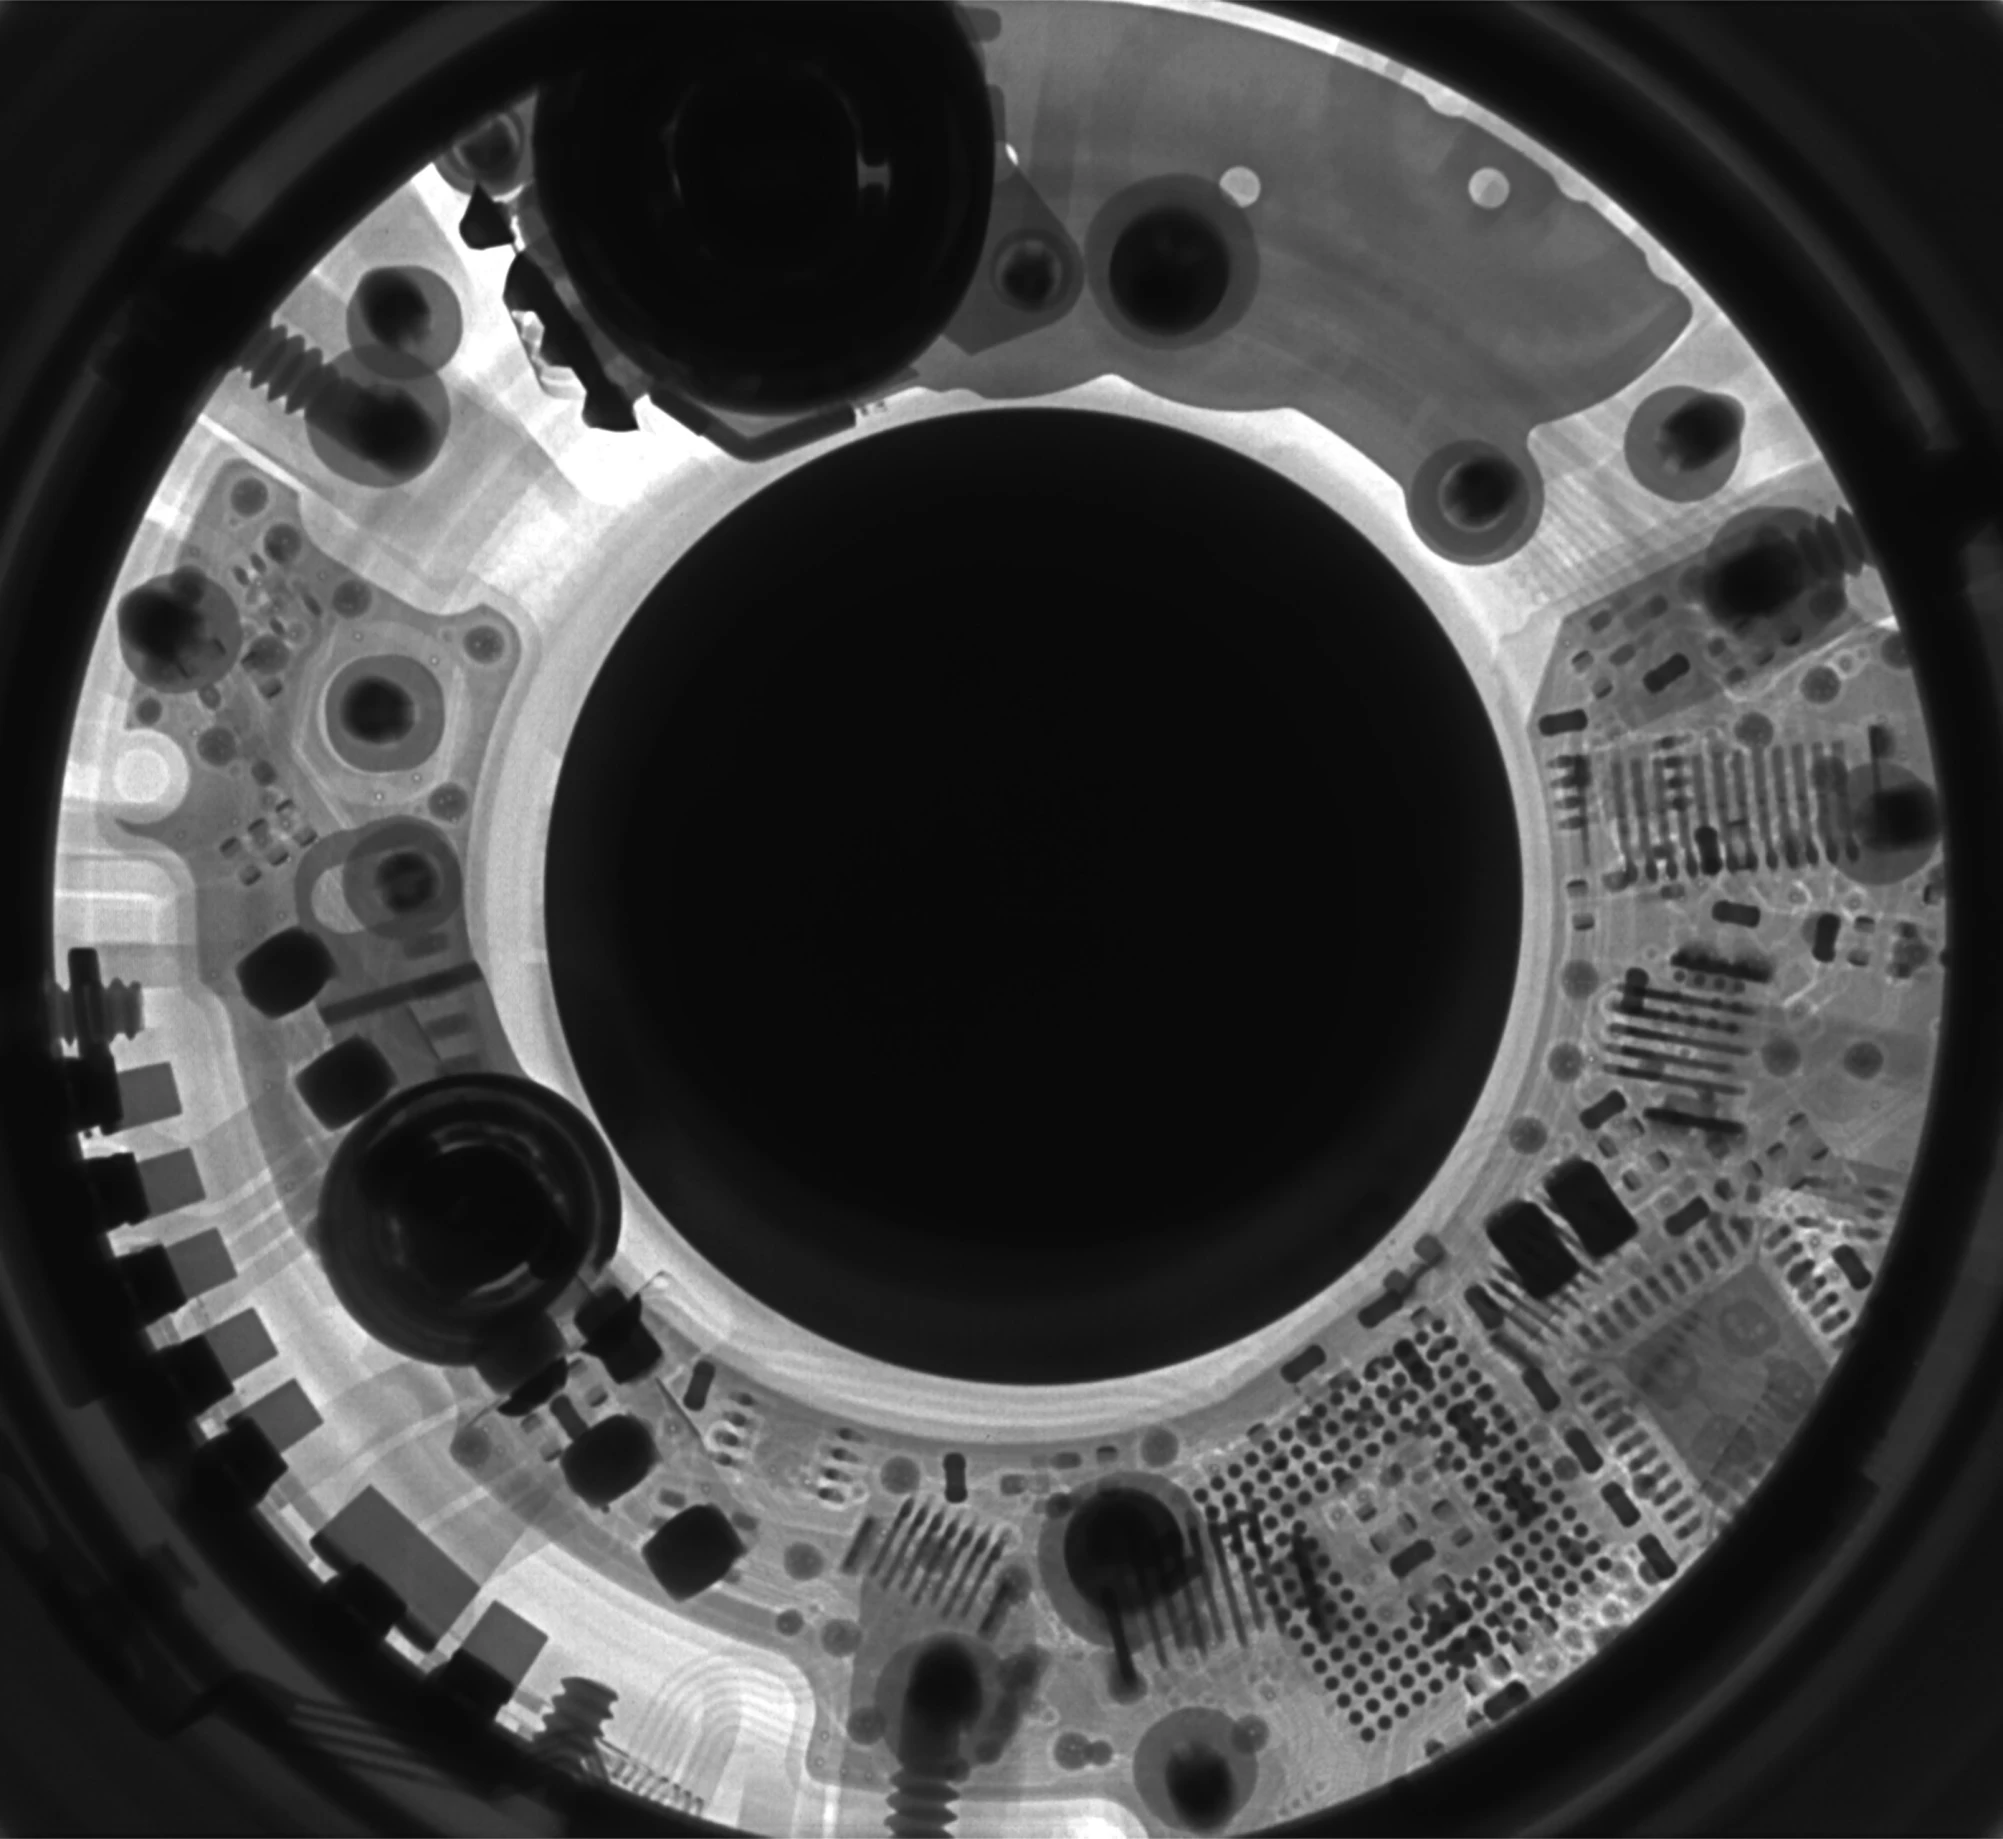 the round hole in the camera shows lots of electronics